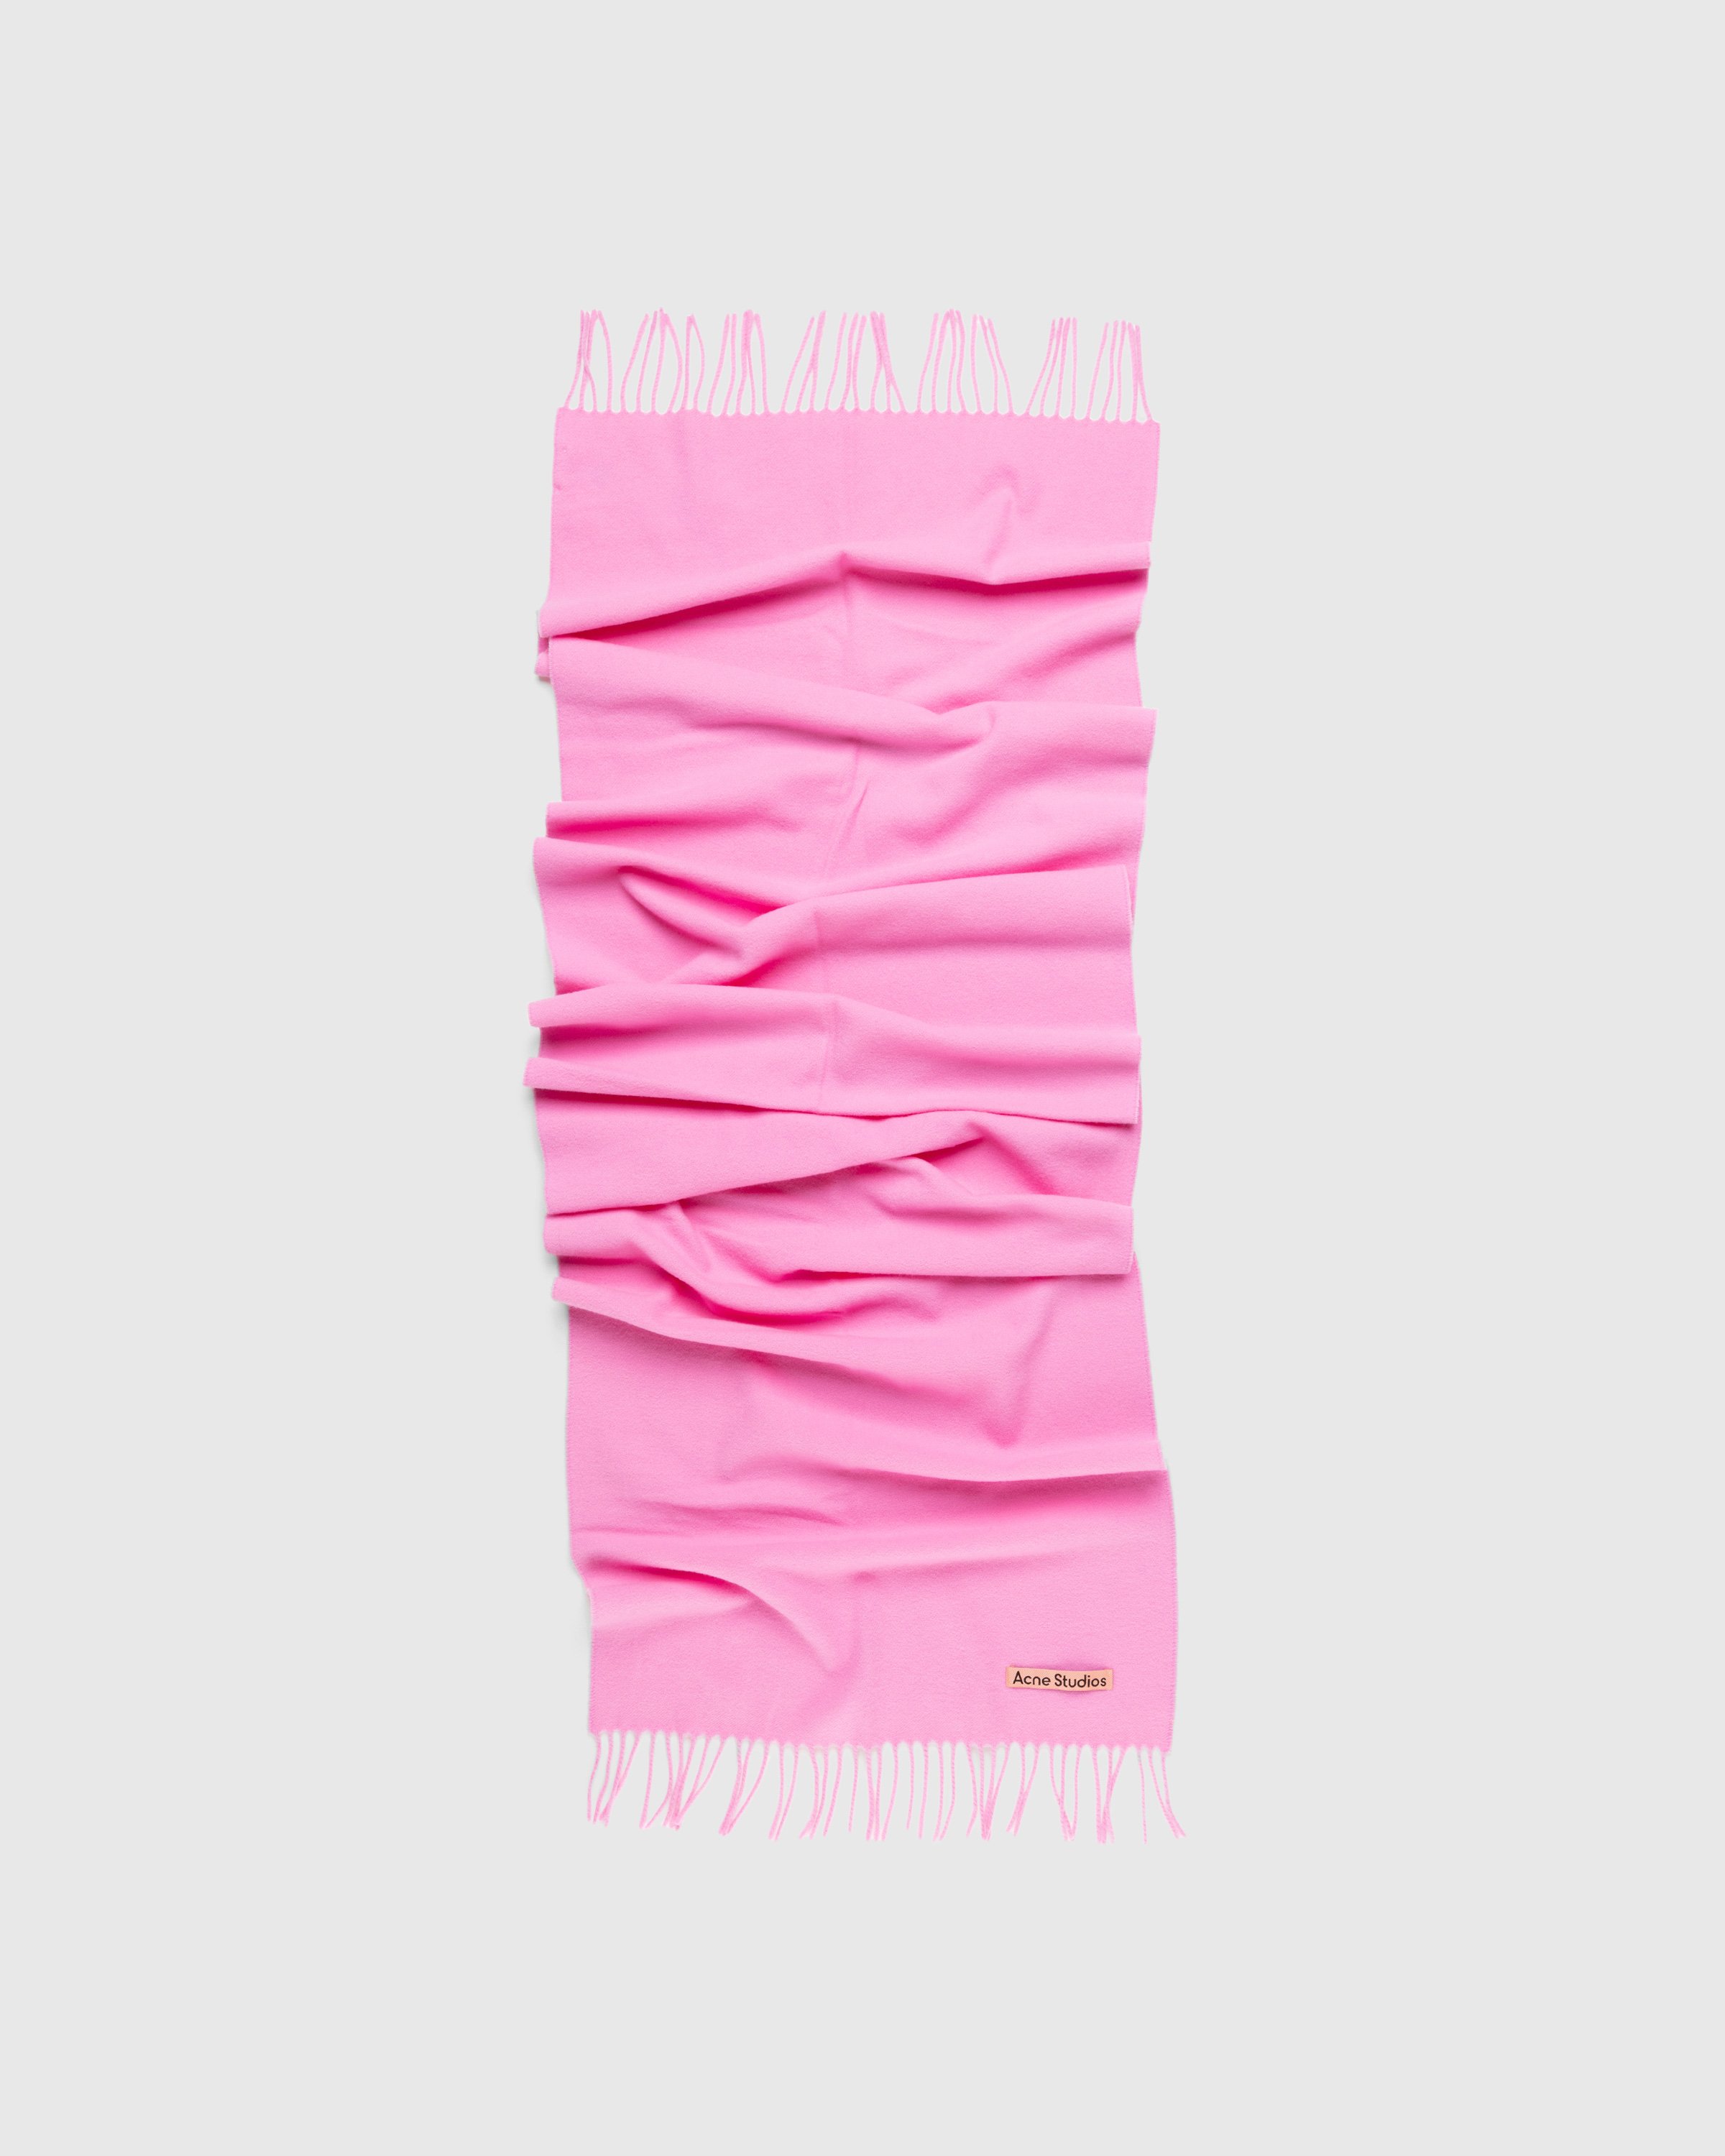 Acne Studios - Fringe Wool Scarf Bubble Pink - Accessories - Pink - Image 2